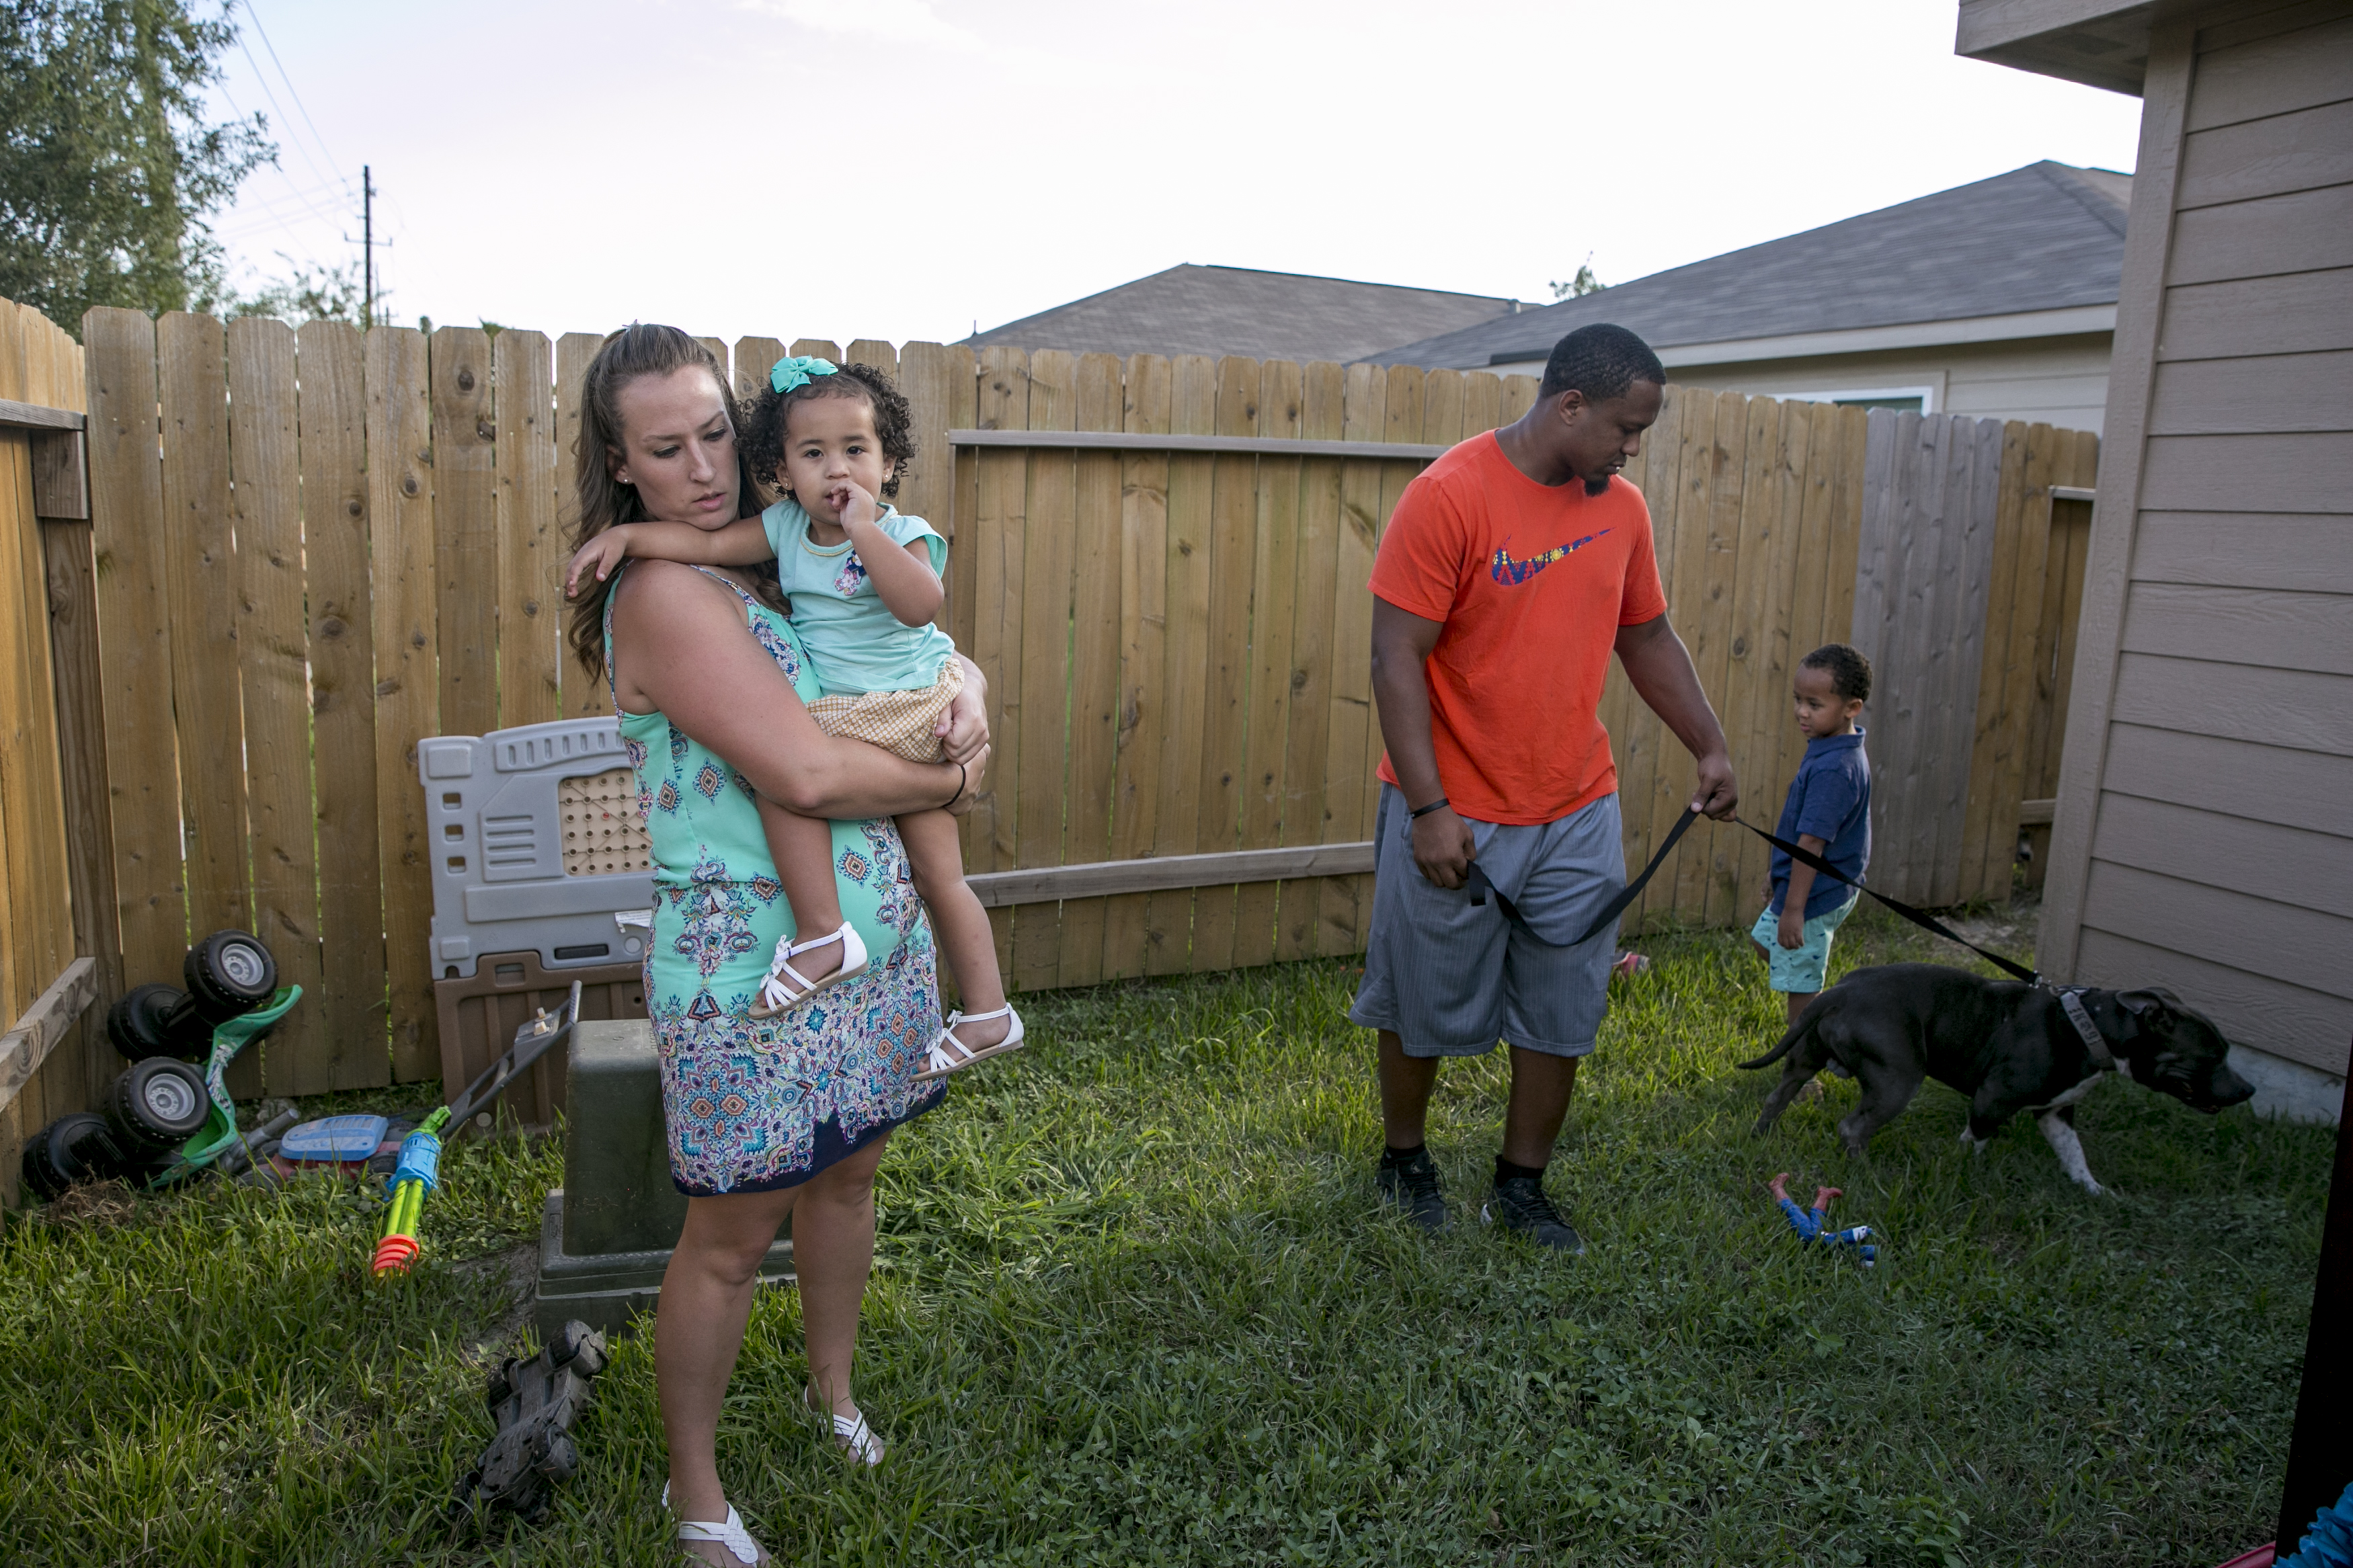 The Courtney family in the backyard of their home. (Ilana Panich-Linsman for TIME)